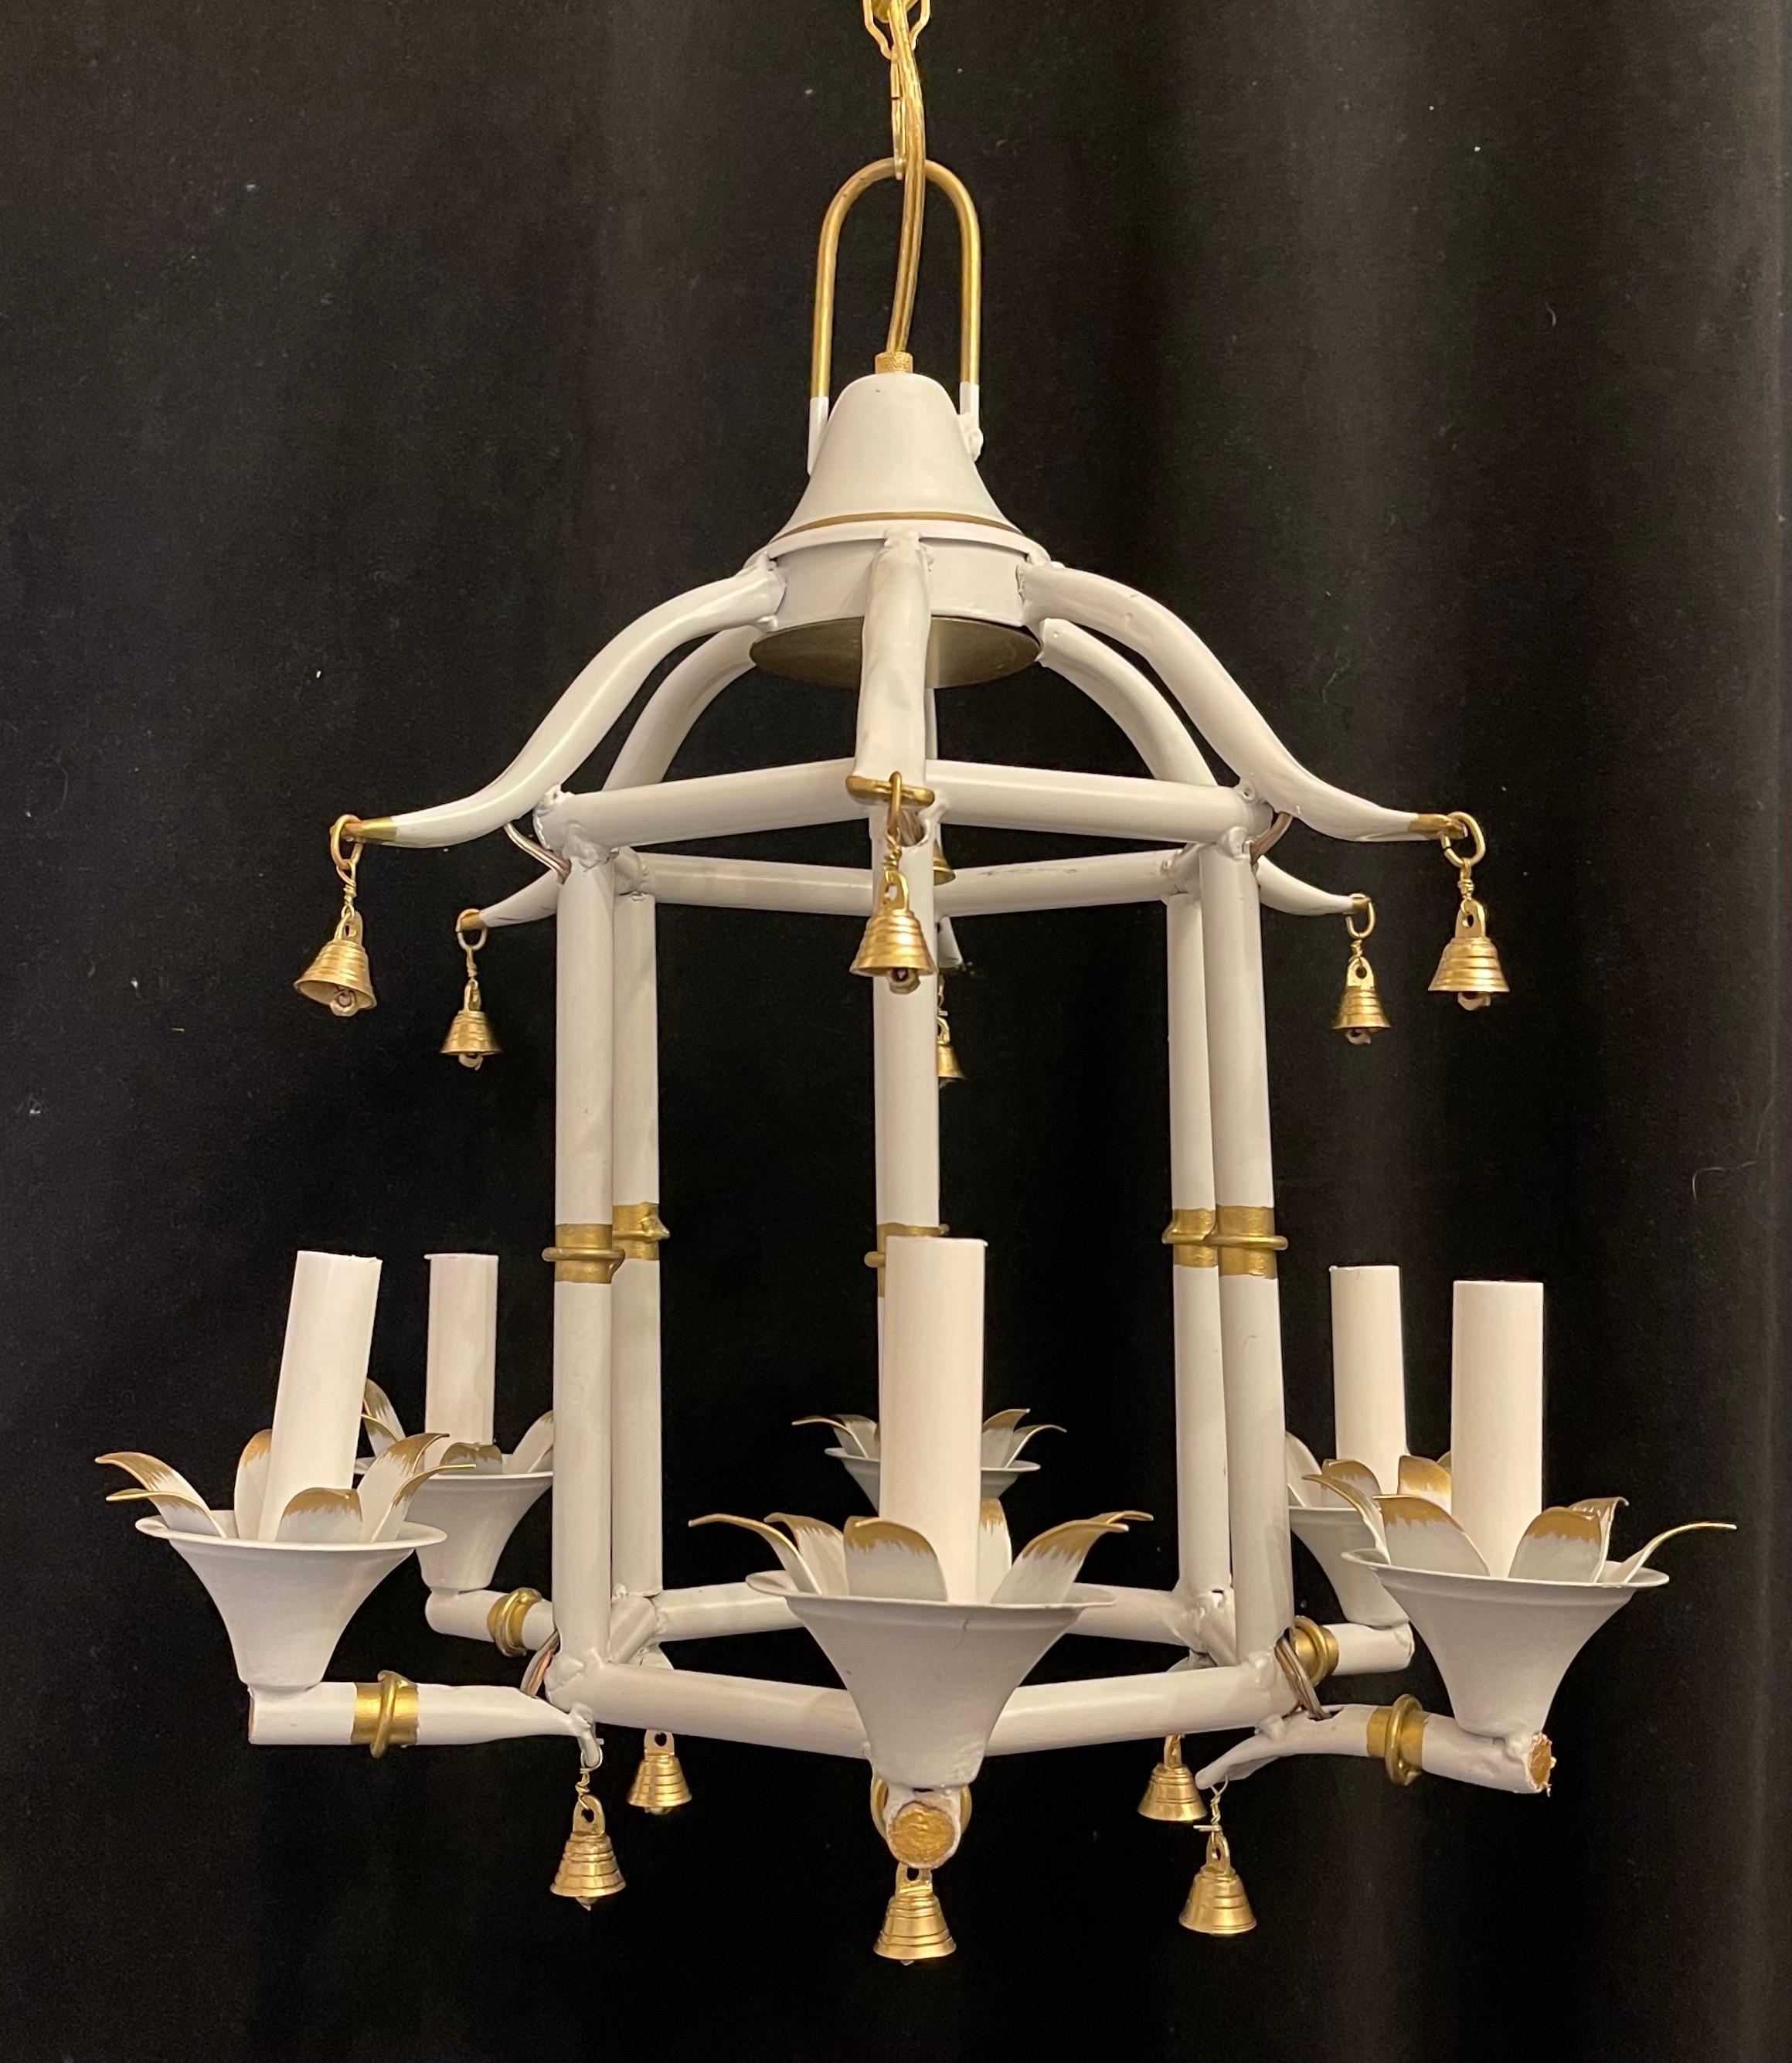 A Wonderful Vintage Mid-Century Bagues / Jansen Style, Pagoda Tole White With Gold Gilt Bamboo Form Chinoiserie Chandelier With 6 Candelabra Lights And Decorated With Bells.
Rewired And Ready To Install With Chain Canopy And Mounting Hardware